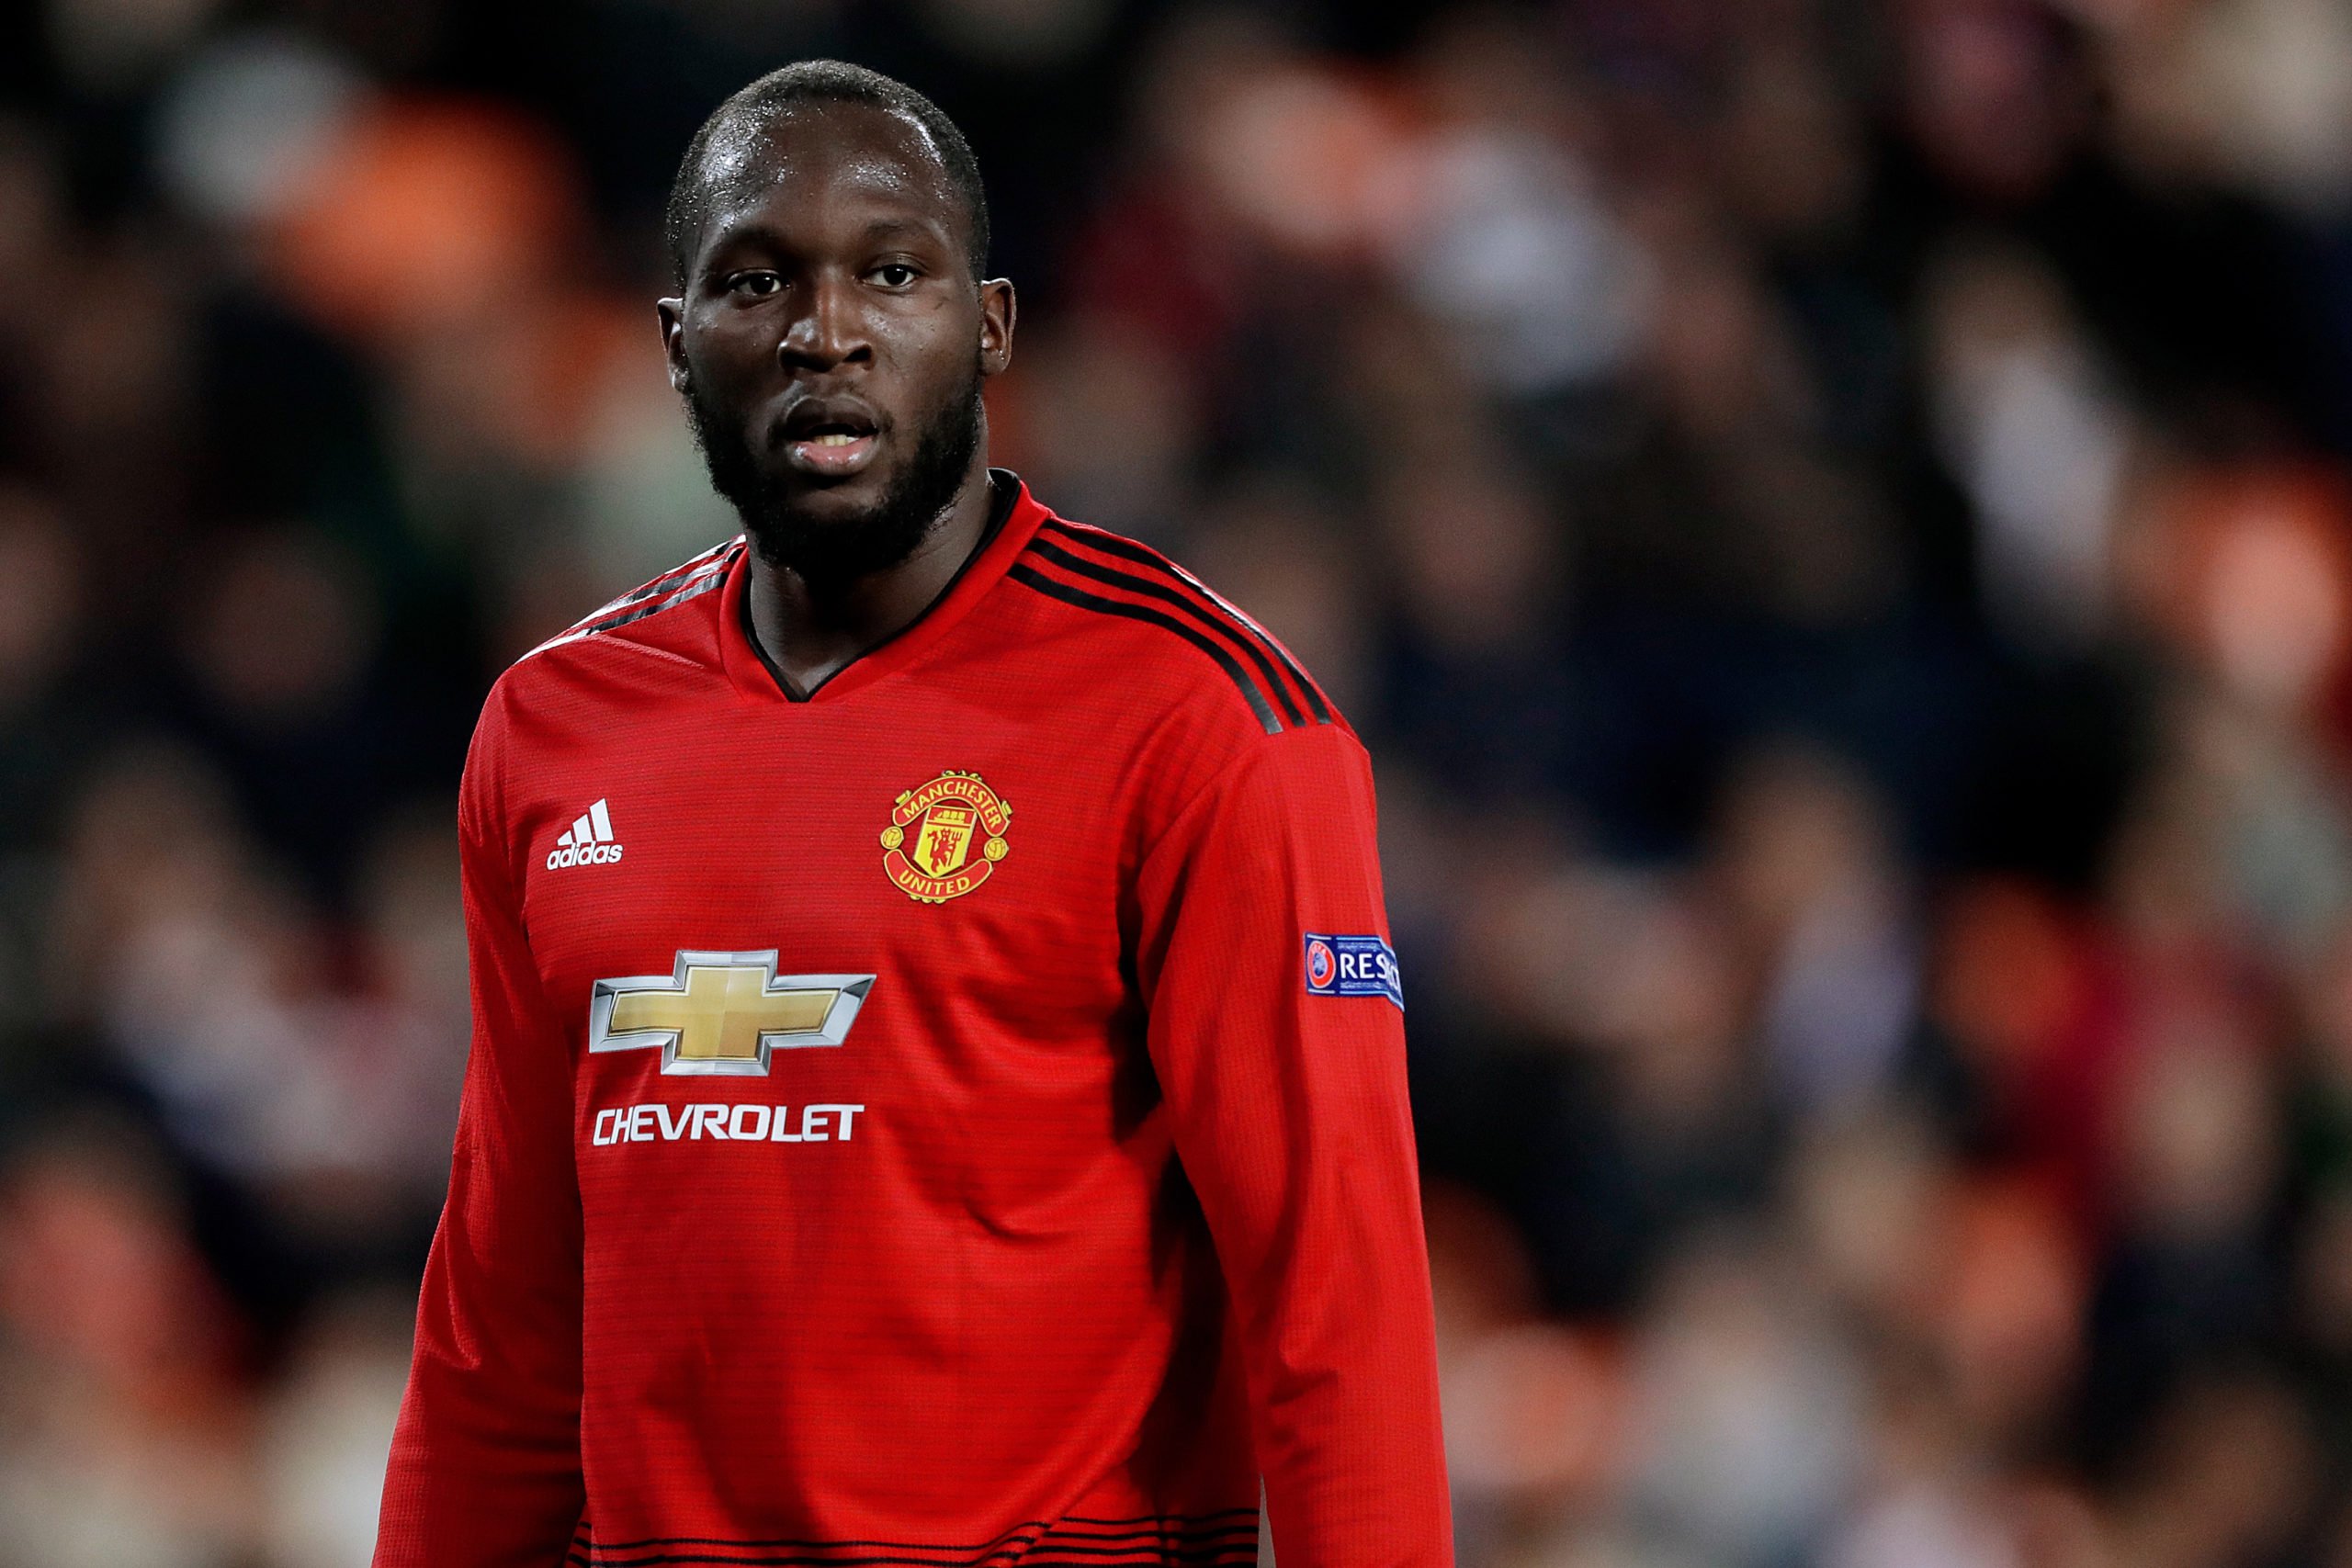 We warned you: Manchester United fans react to Romelu Lukaku's Chelsea comments